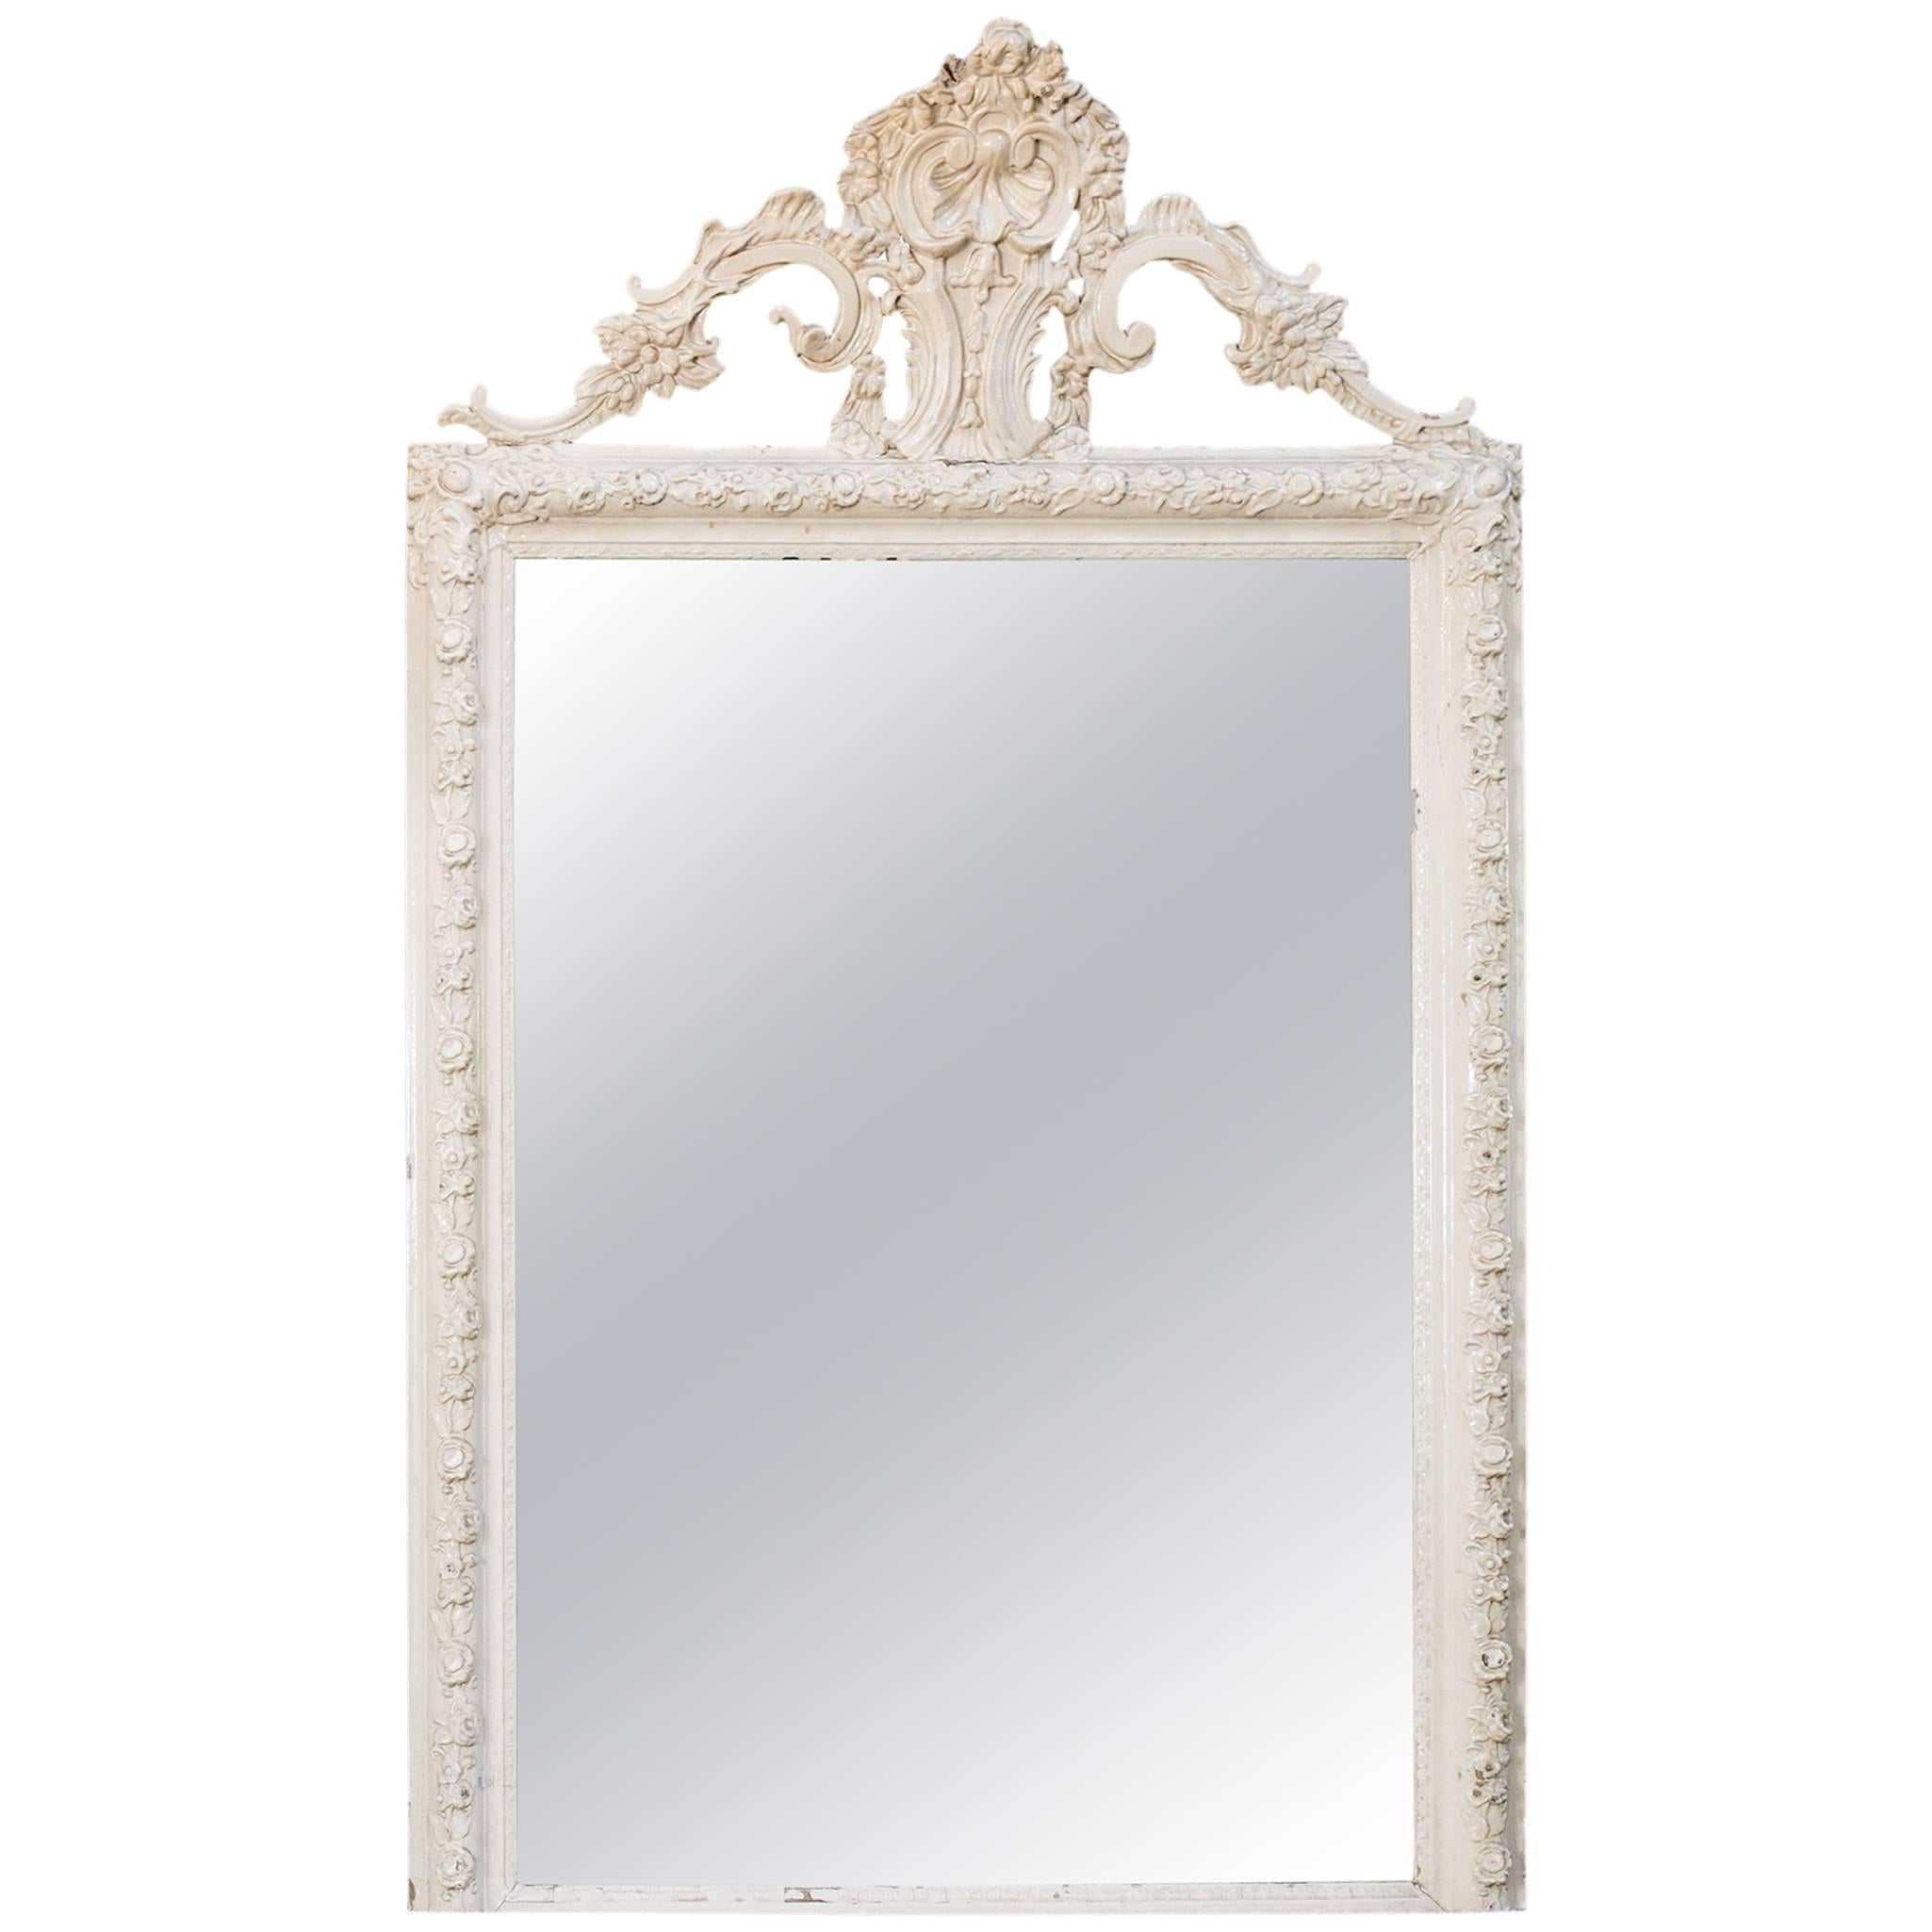 Glamorous Creamy-White Over-Painted Rococo Hand-Carved Wood Mirror, circa 1900